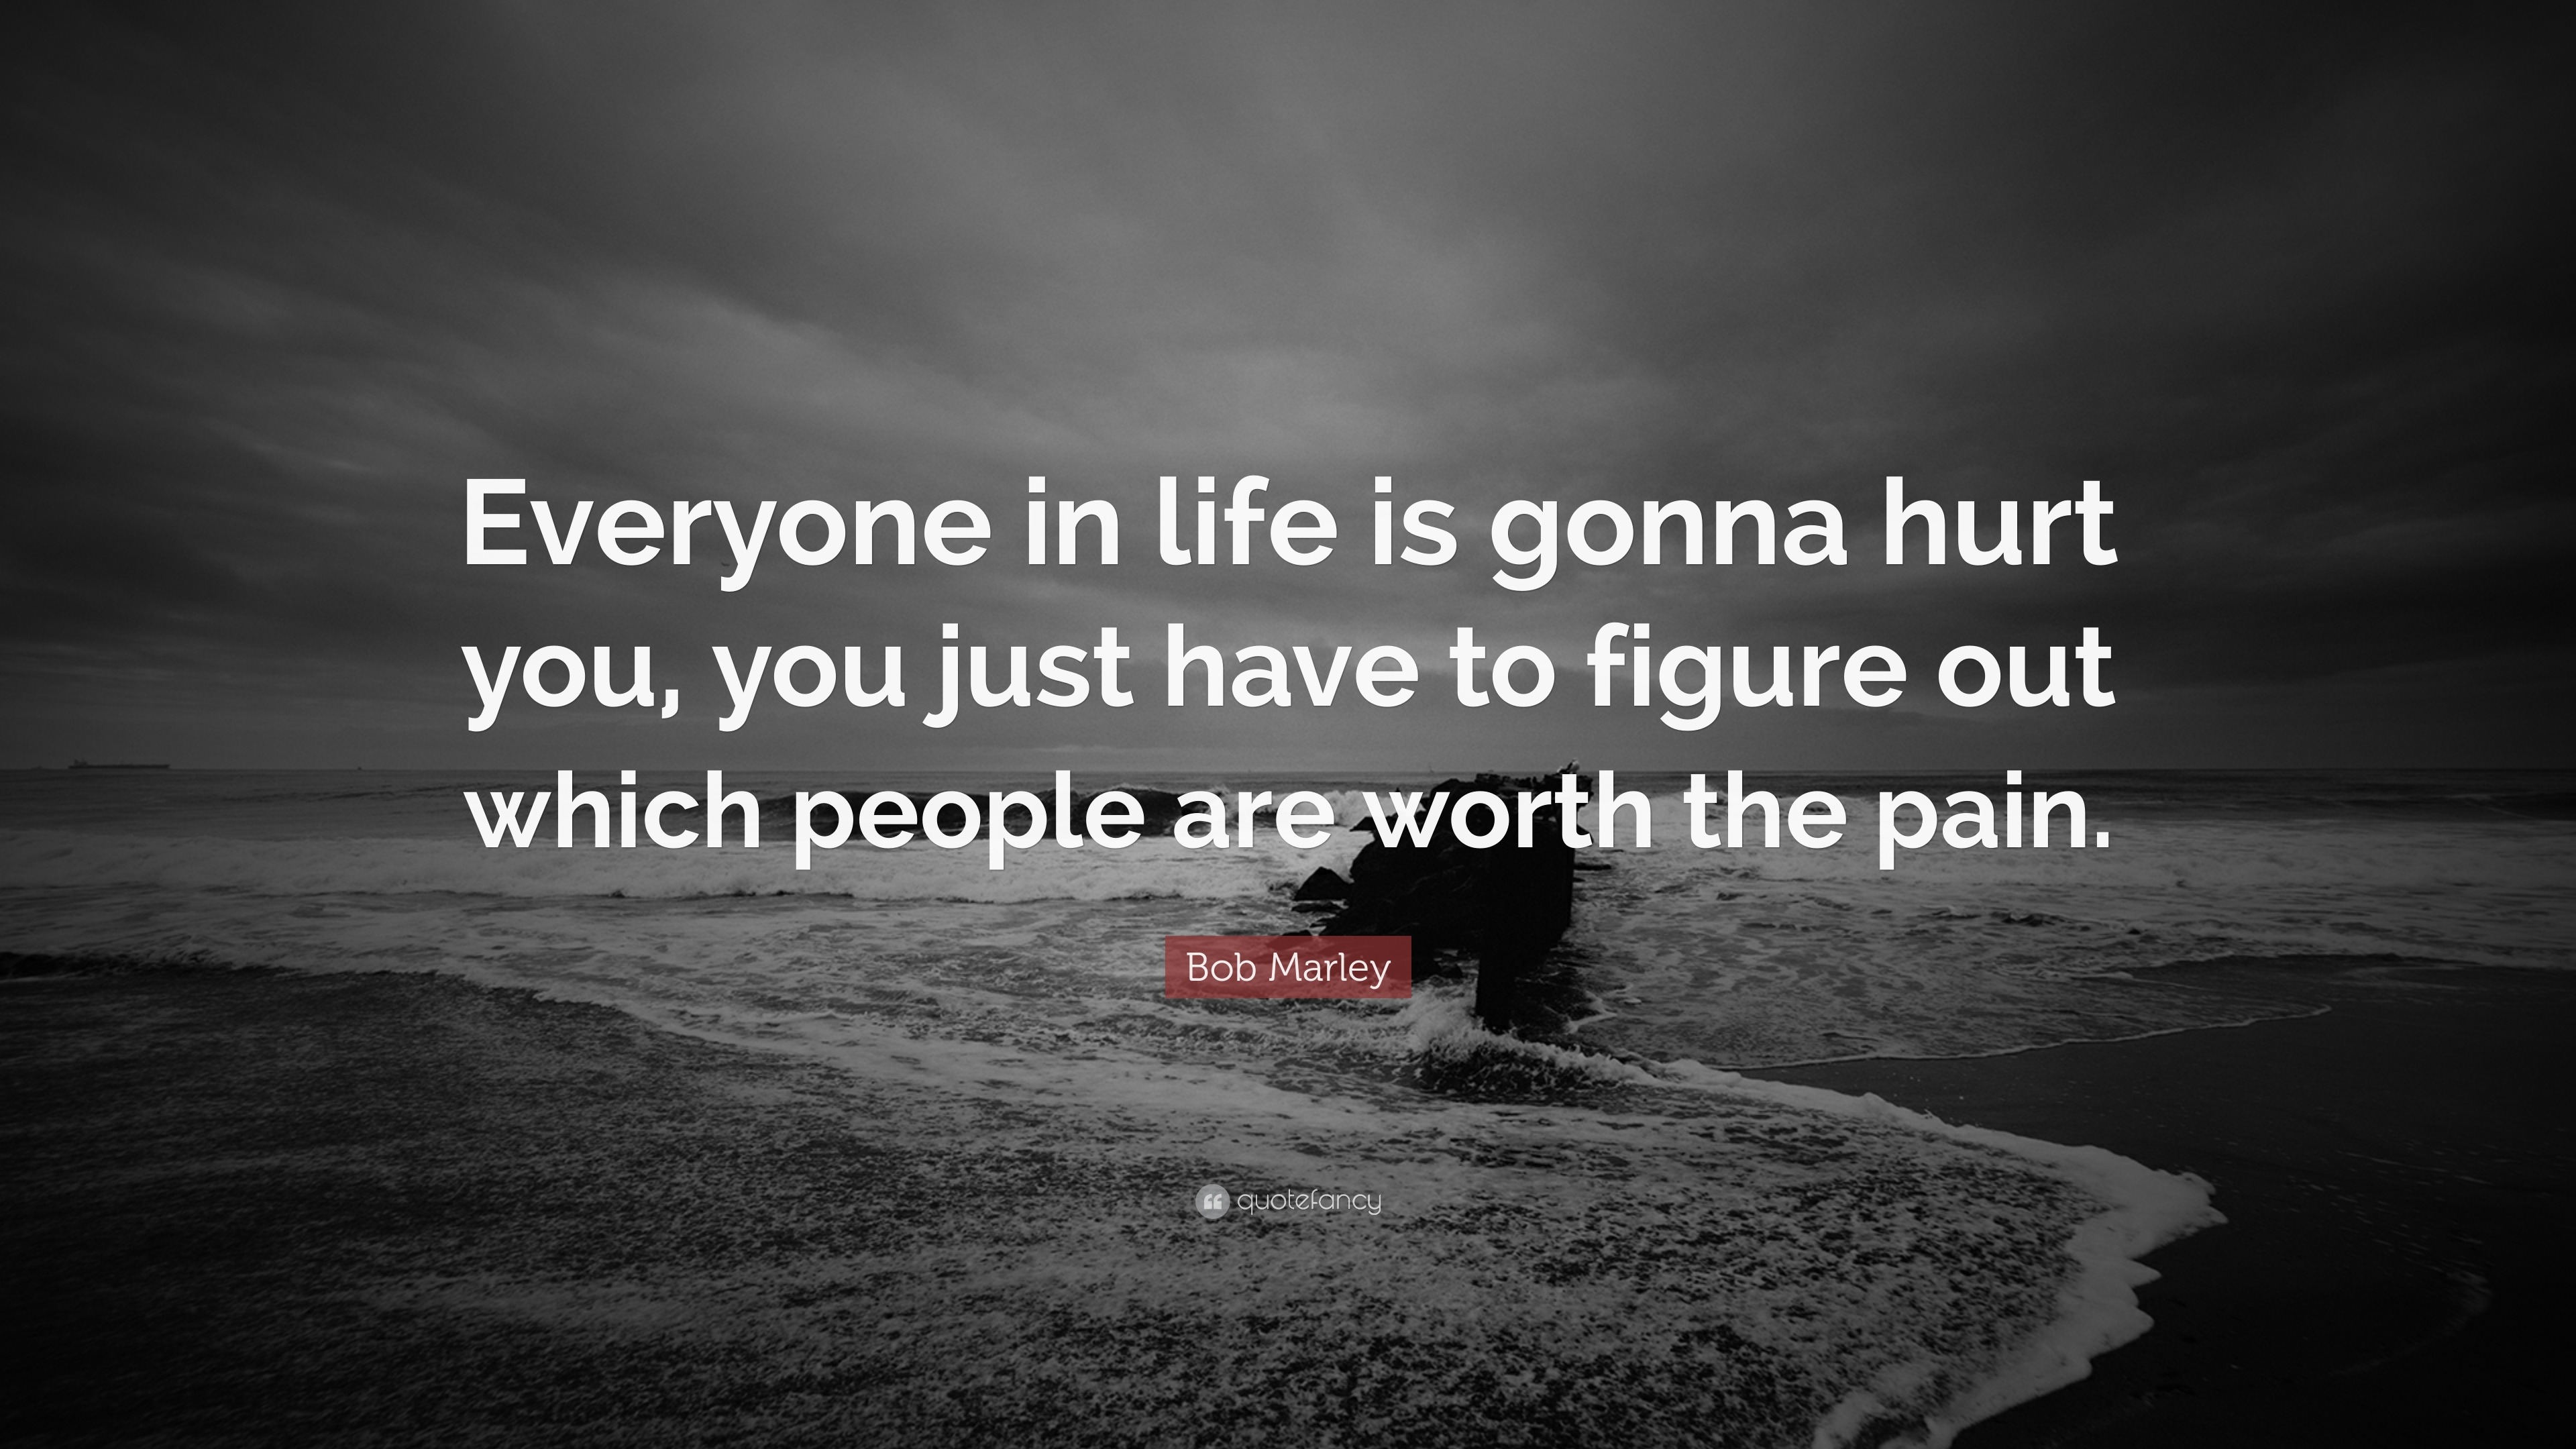 Bob Marley Quote “Everyone in life is gonna hurt you you just have